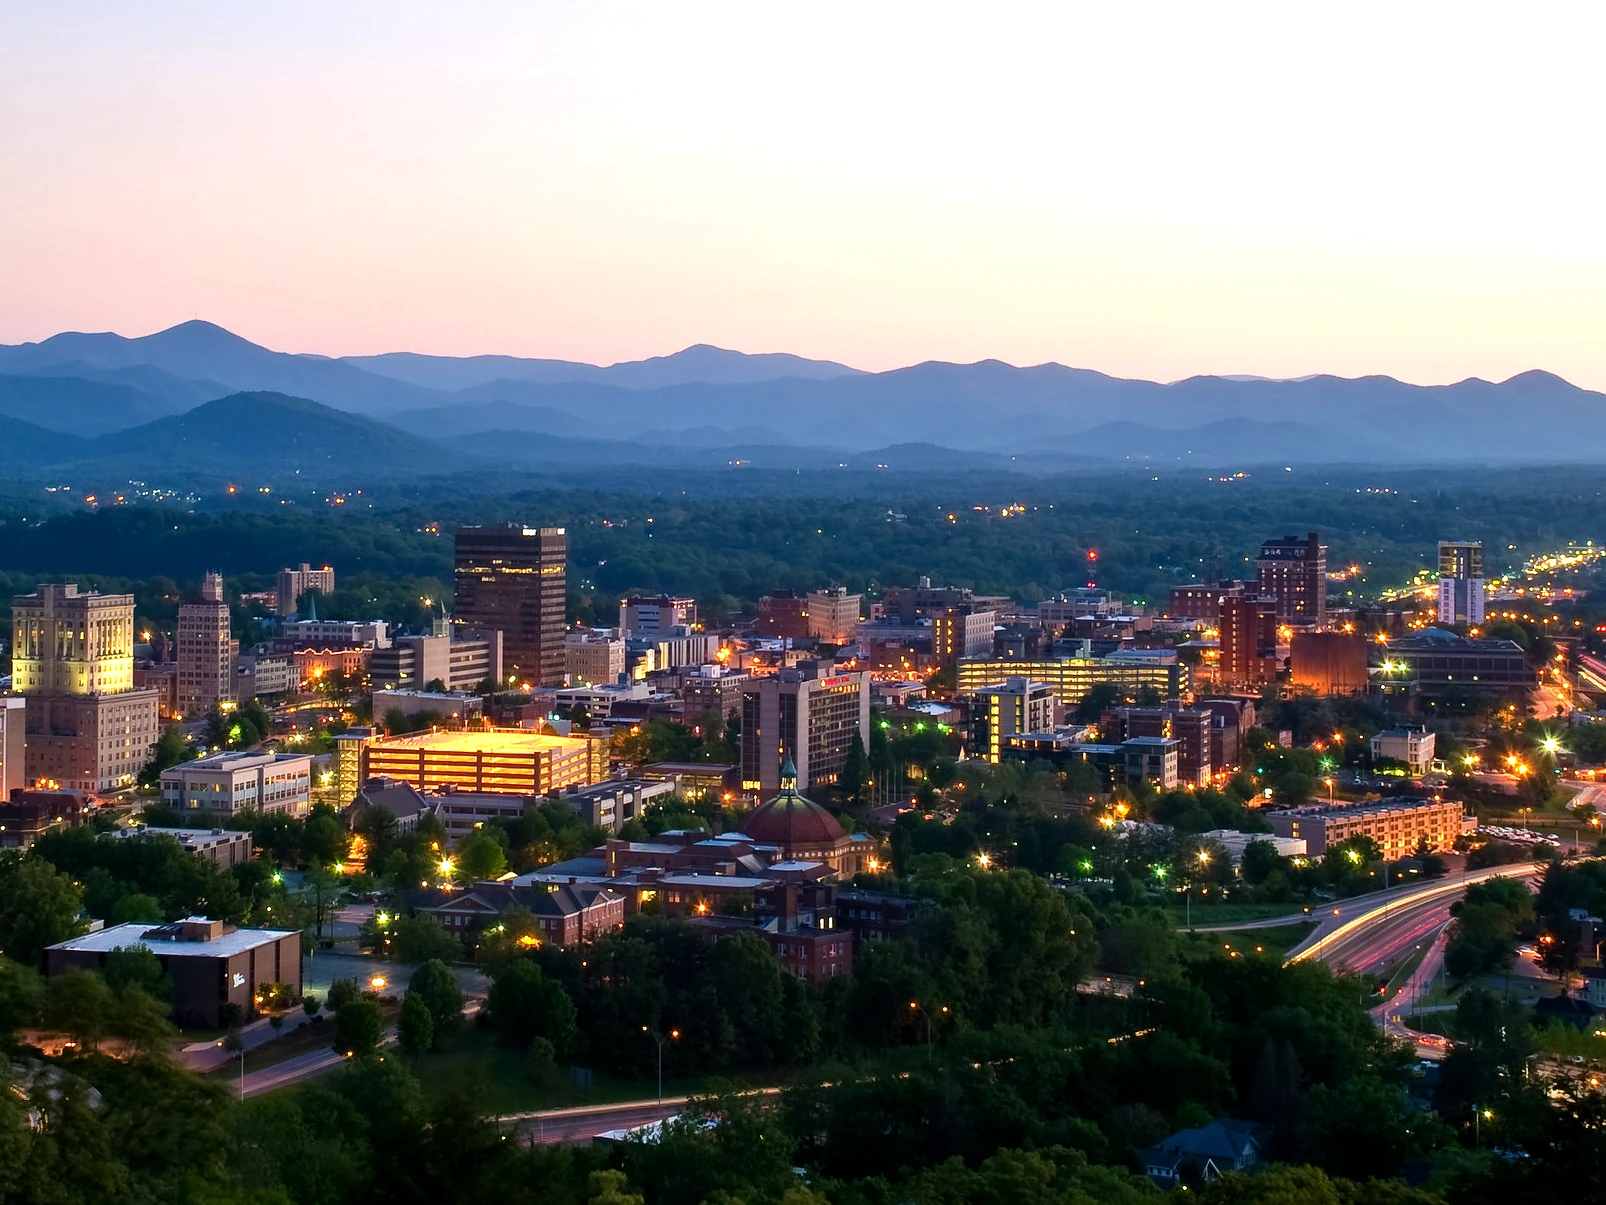 Aerial view of Asheville, North Carolina at dusk with mountains in the background. Local SEO helps Asheville small businesses improve search visibility and reach more customers in the area.